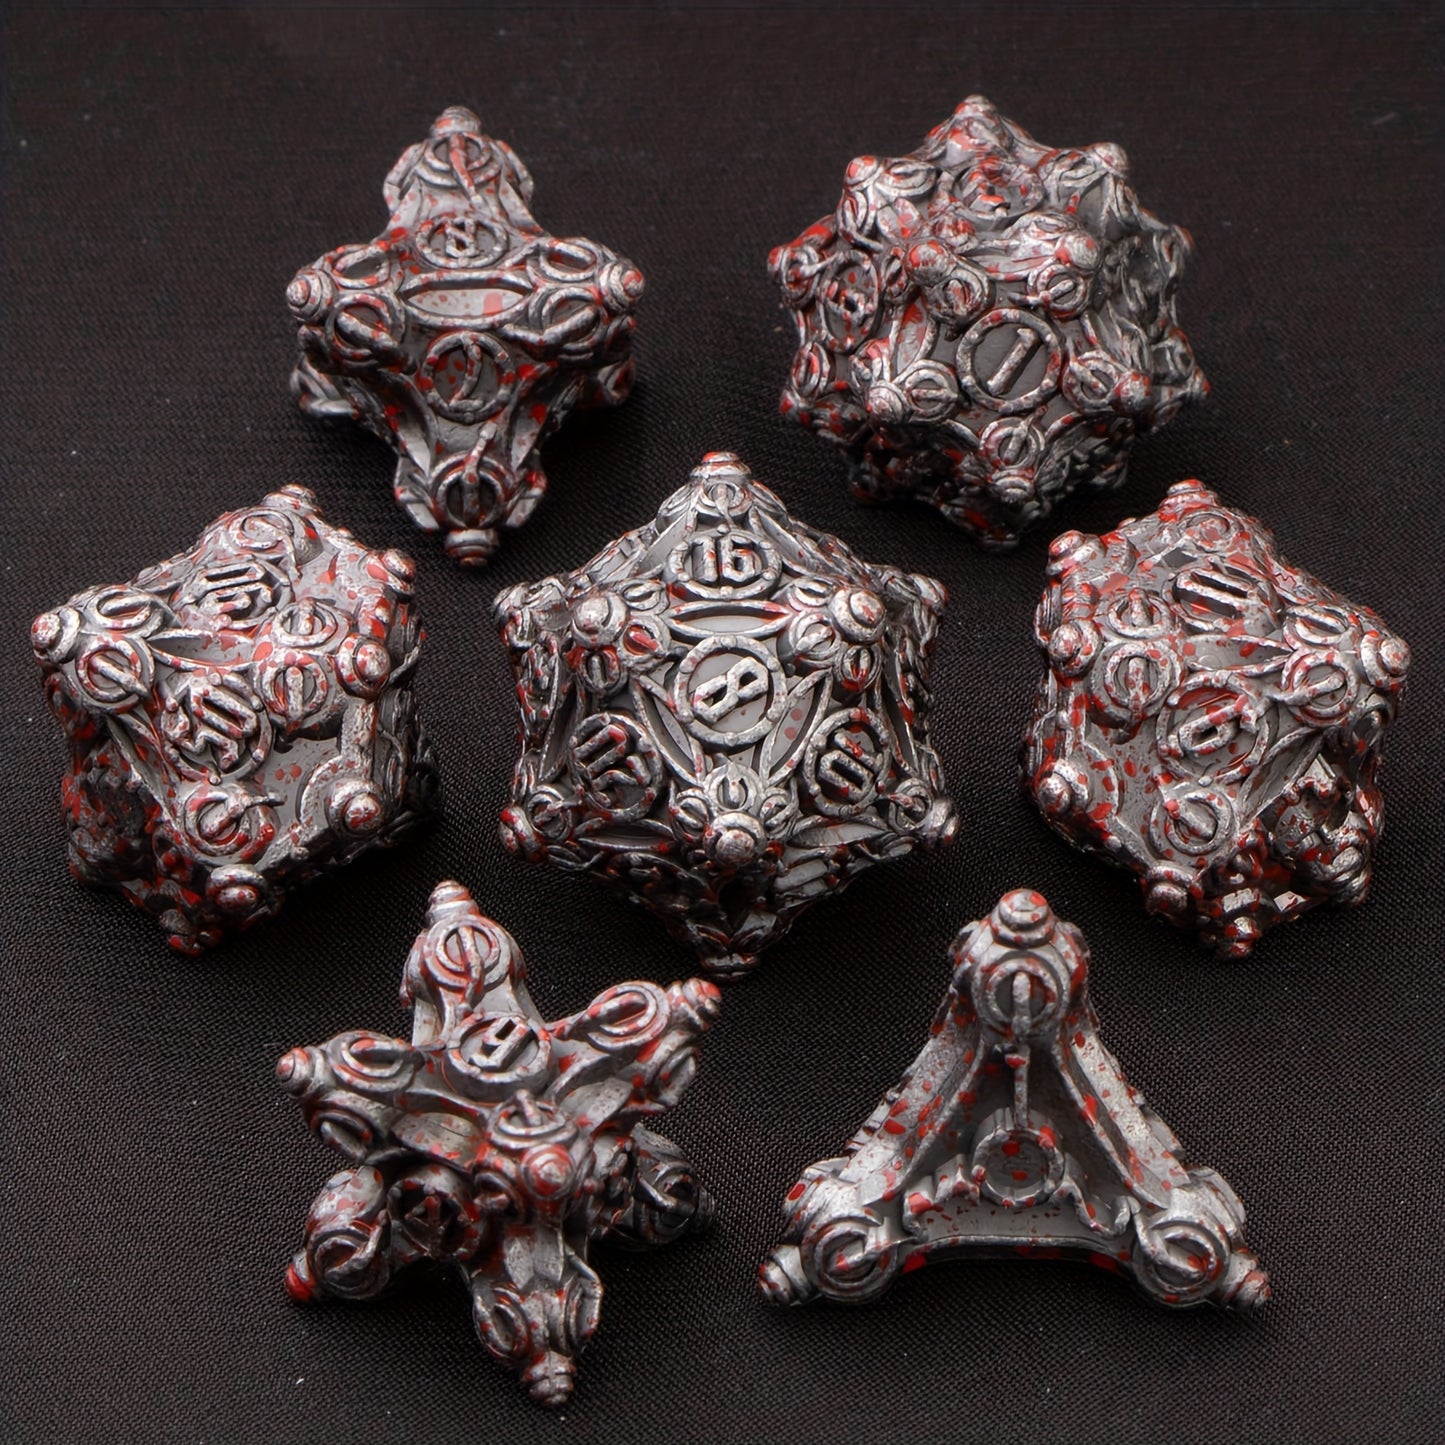 FREE Today: Bleeding Metal Dice For D&D